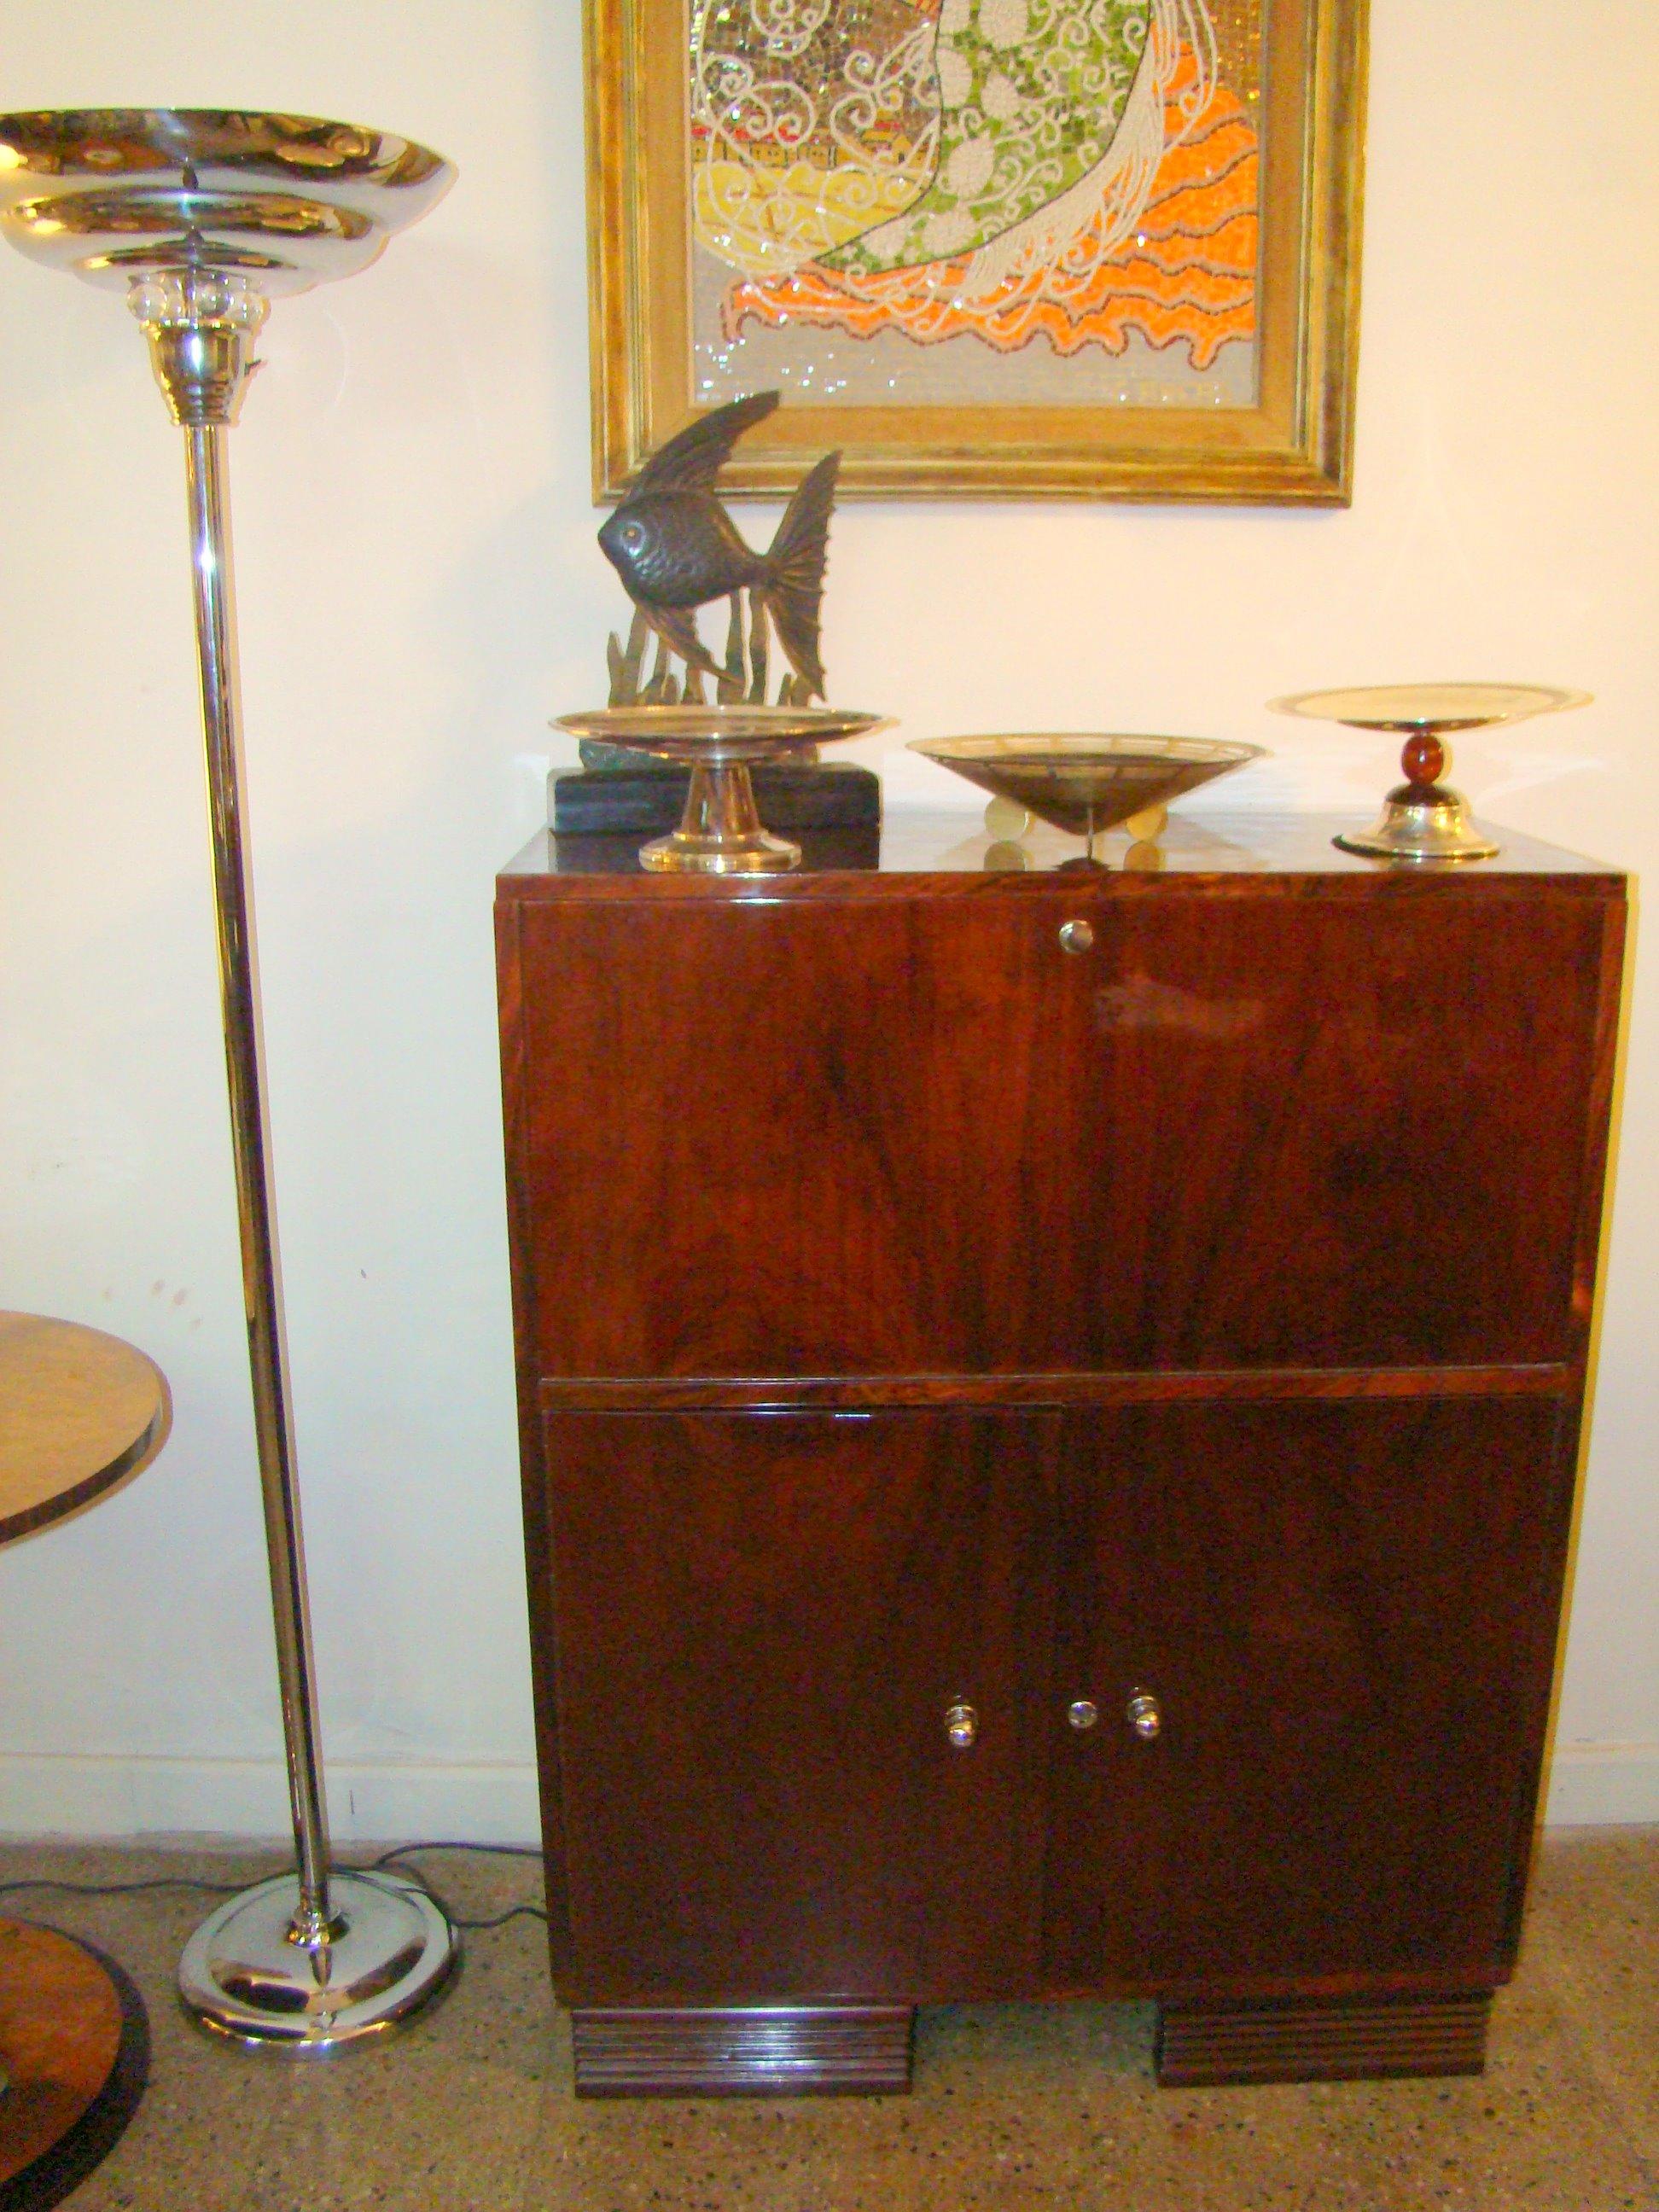 Art Deco Desk
Year 1920
French
Finish: polyurethanic lacquer
It is an elegant and sophisticated dream desk. It has a large work surface.
The quality of the furniture make it unique. It is an icon of distinction.
You want to live in the golden years,